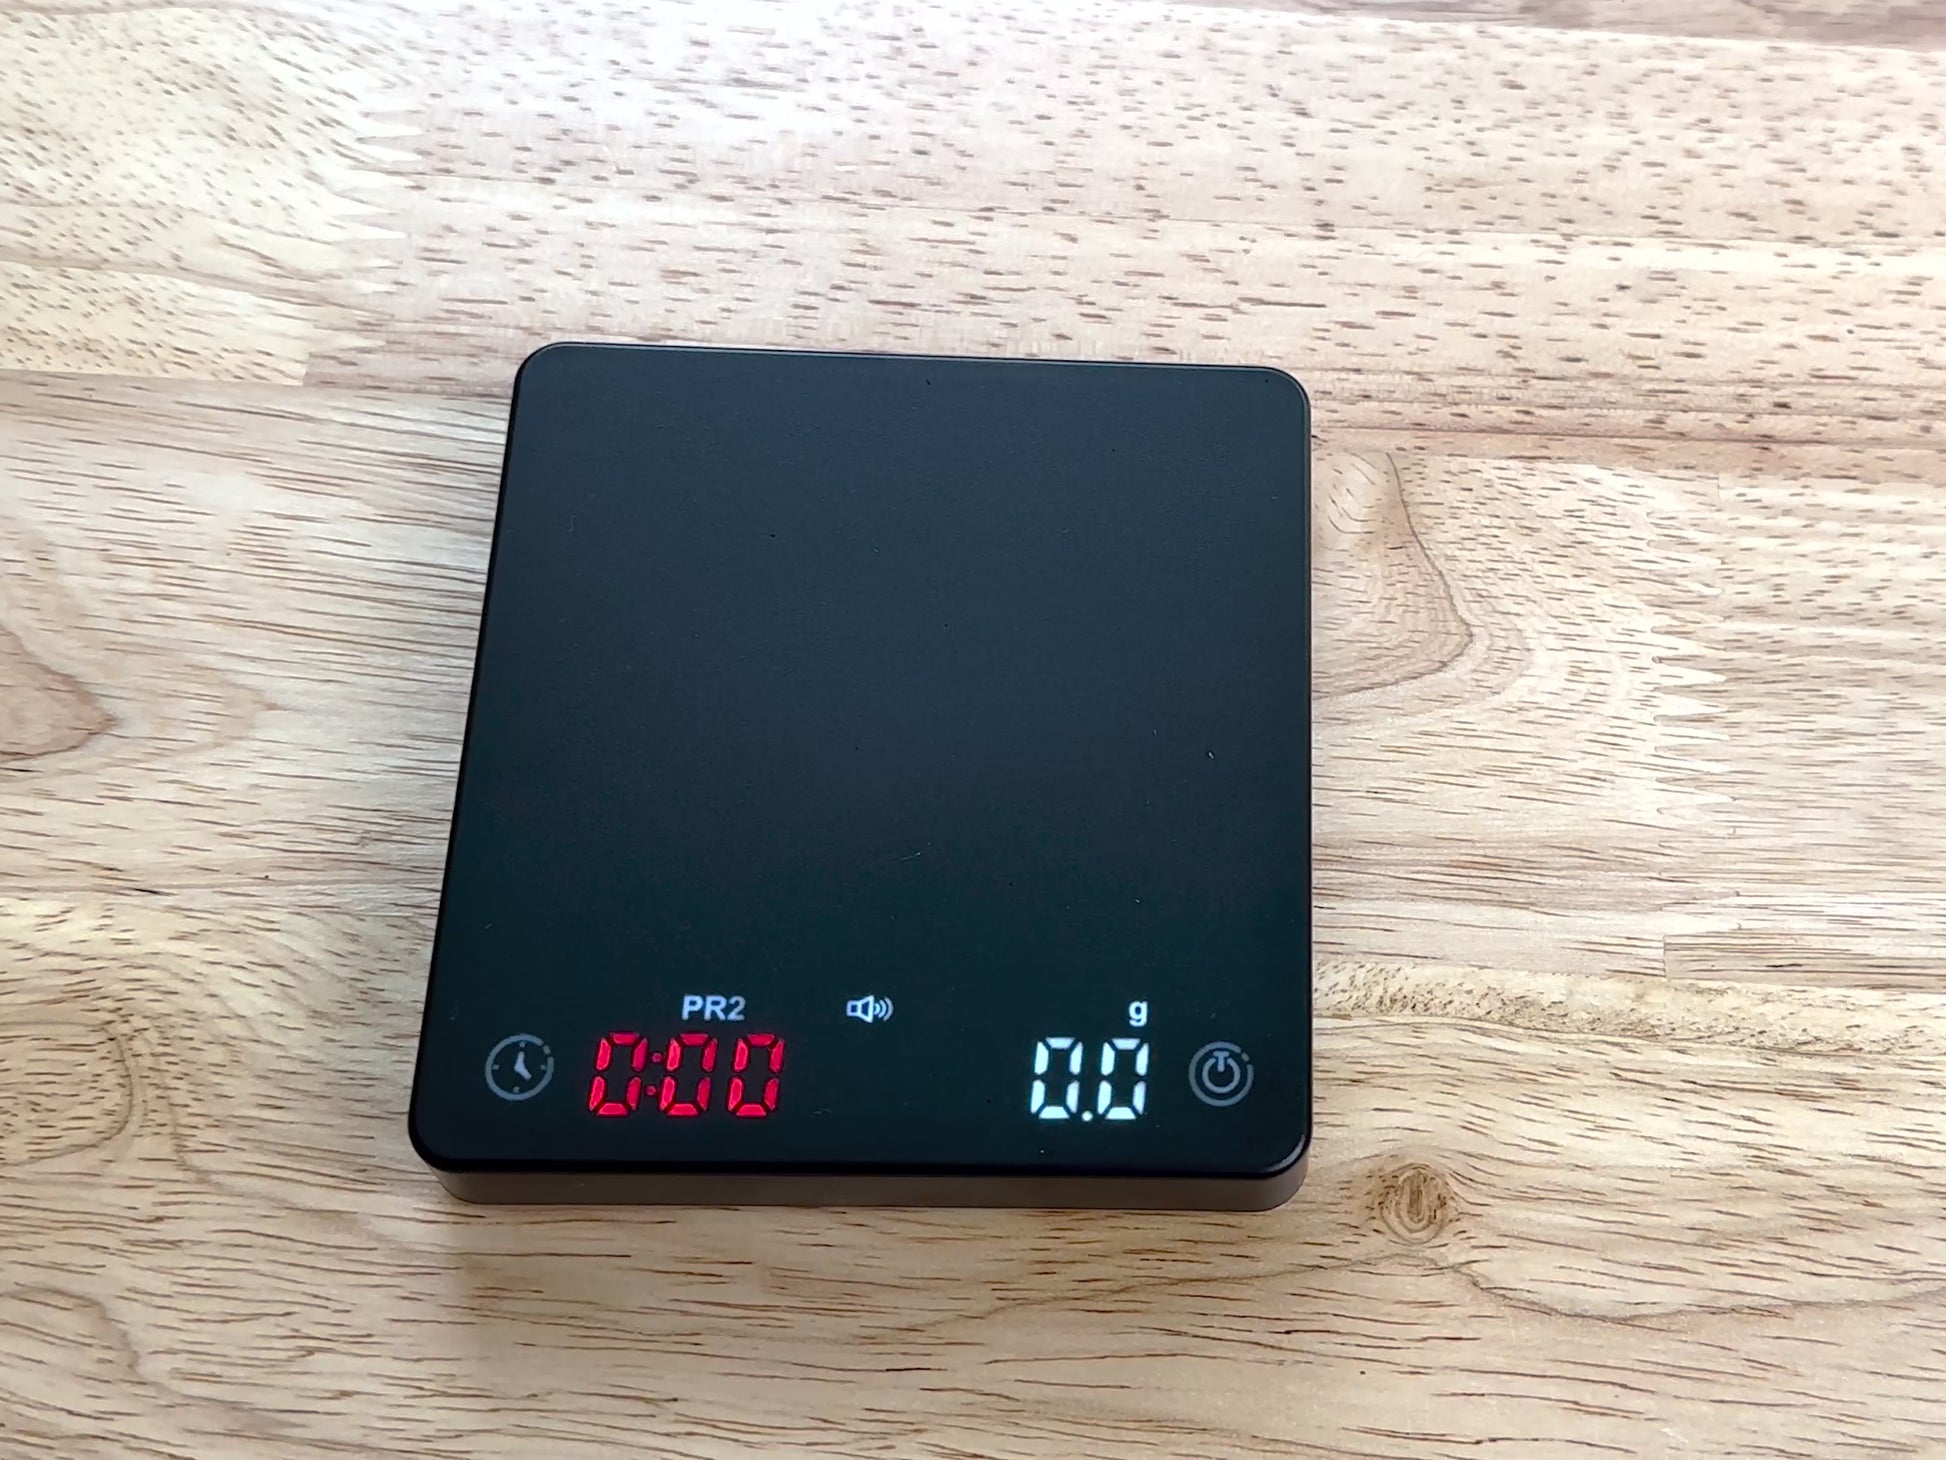 Coffee scale with timer